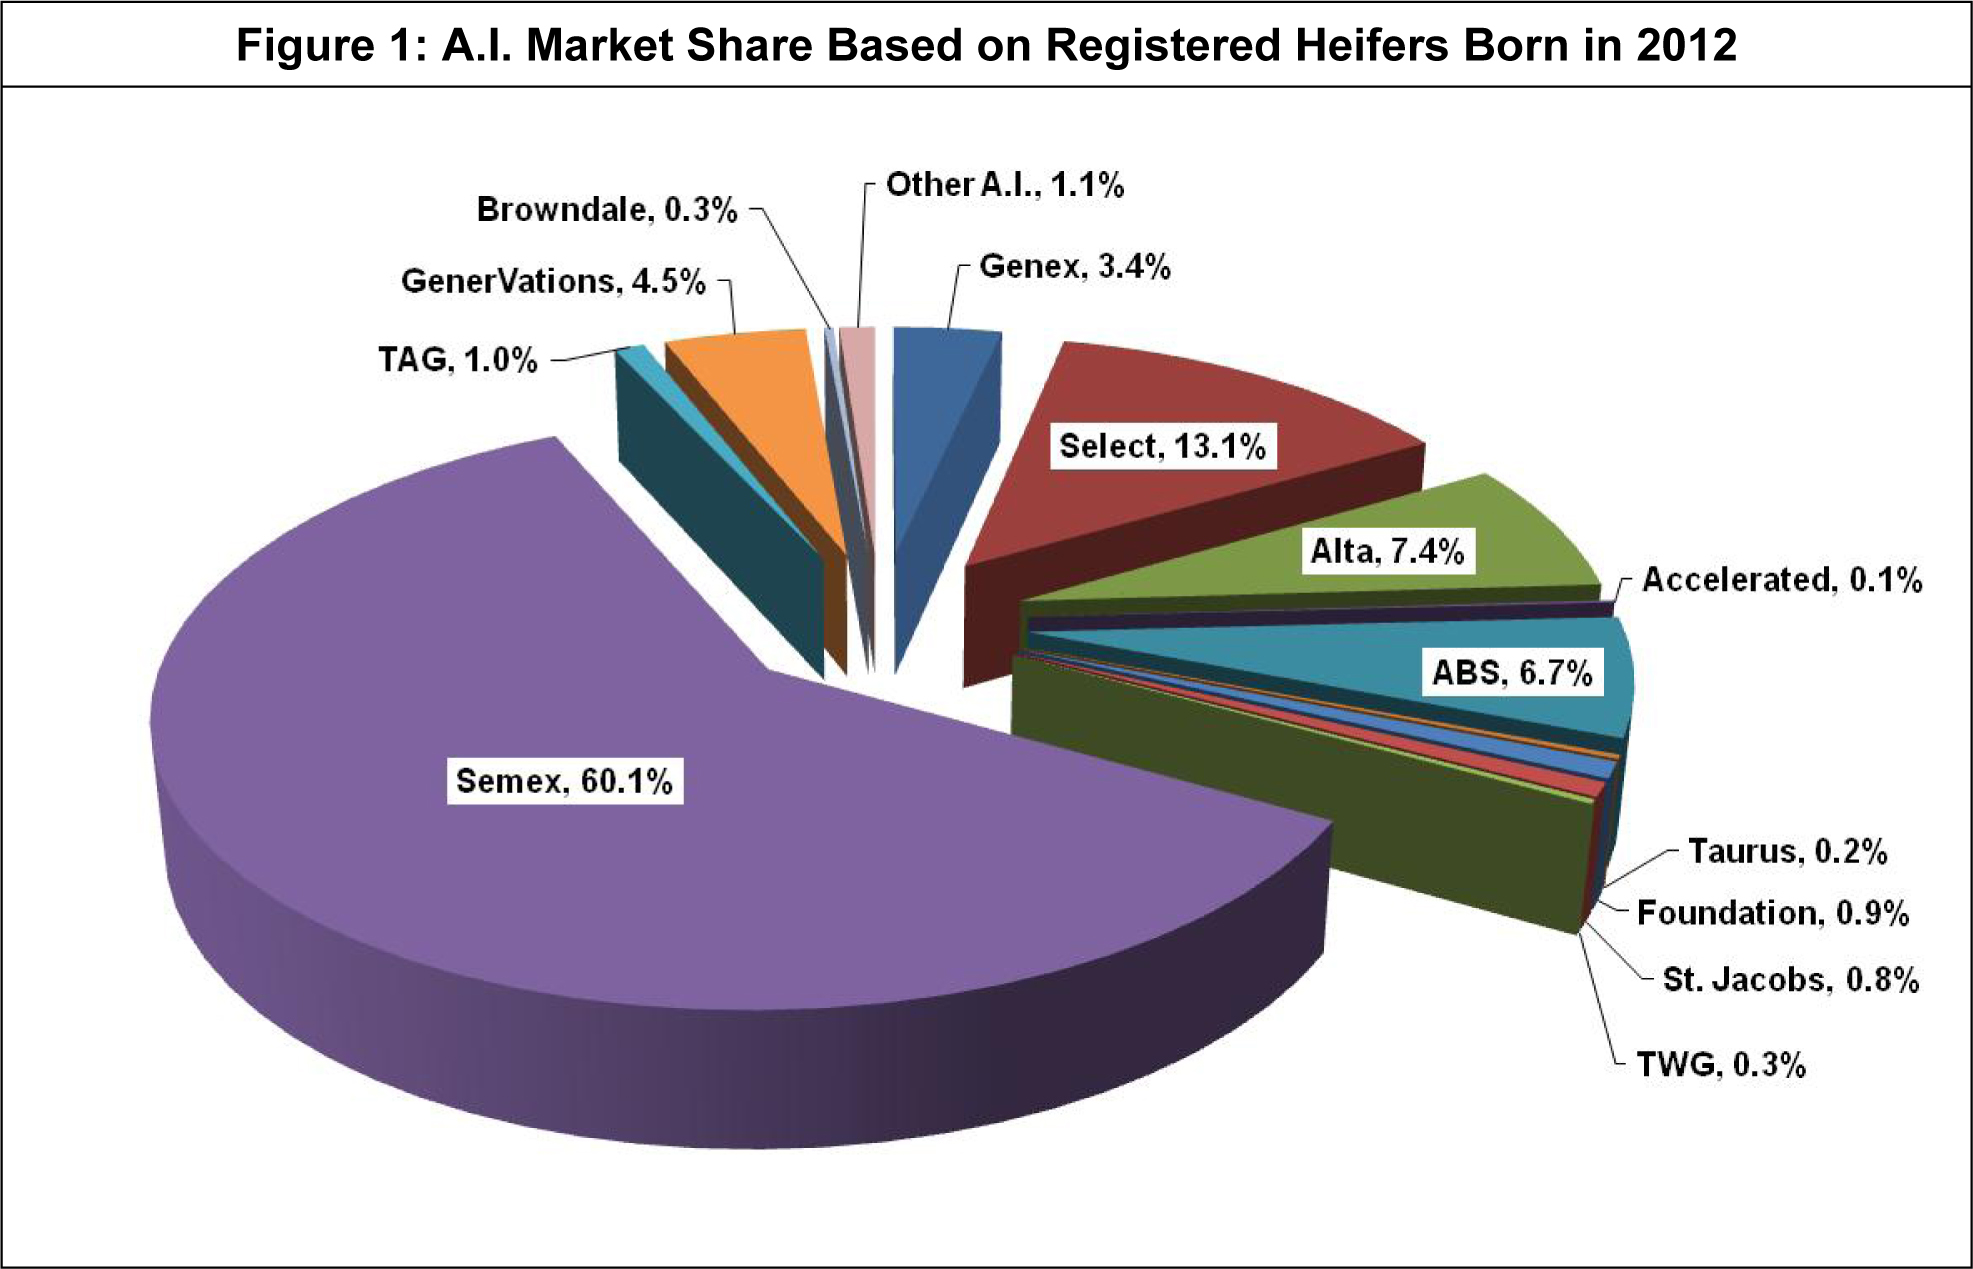 Microsoft Word - AI Market Share & Popular Sires Article - May 2